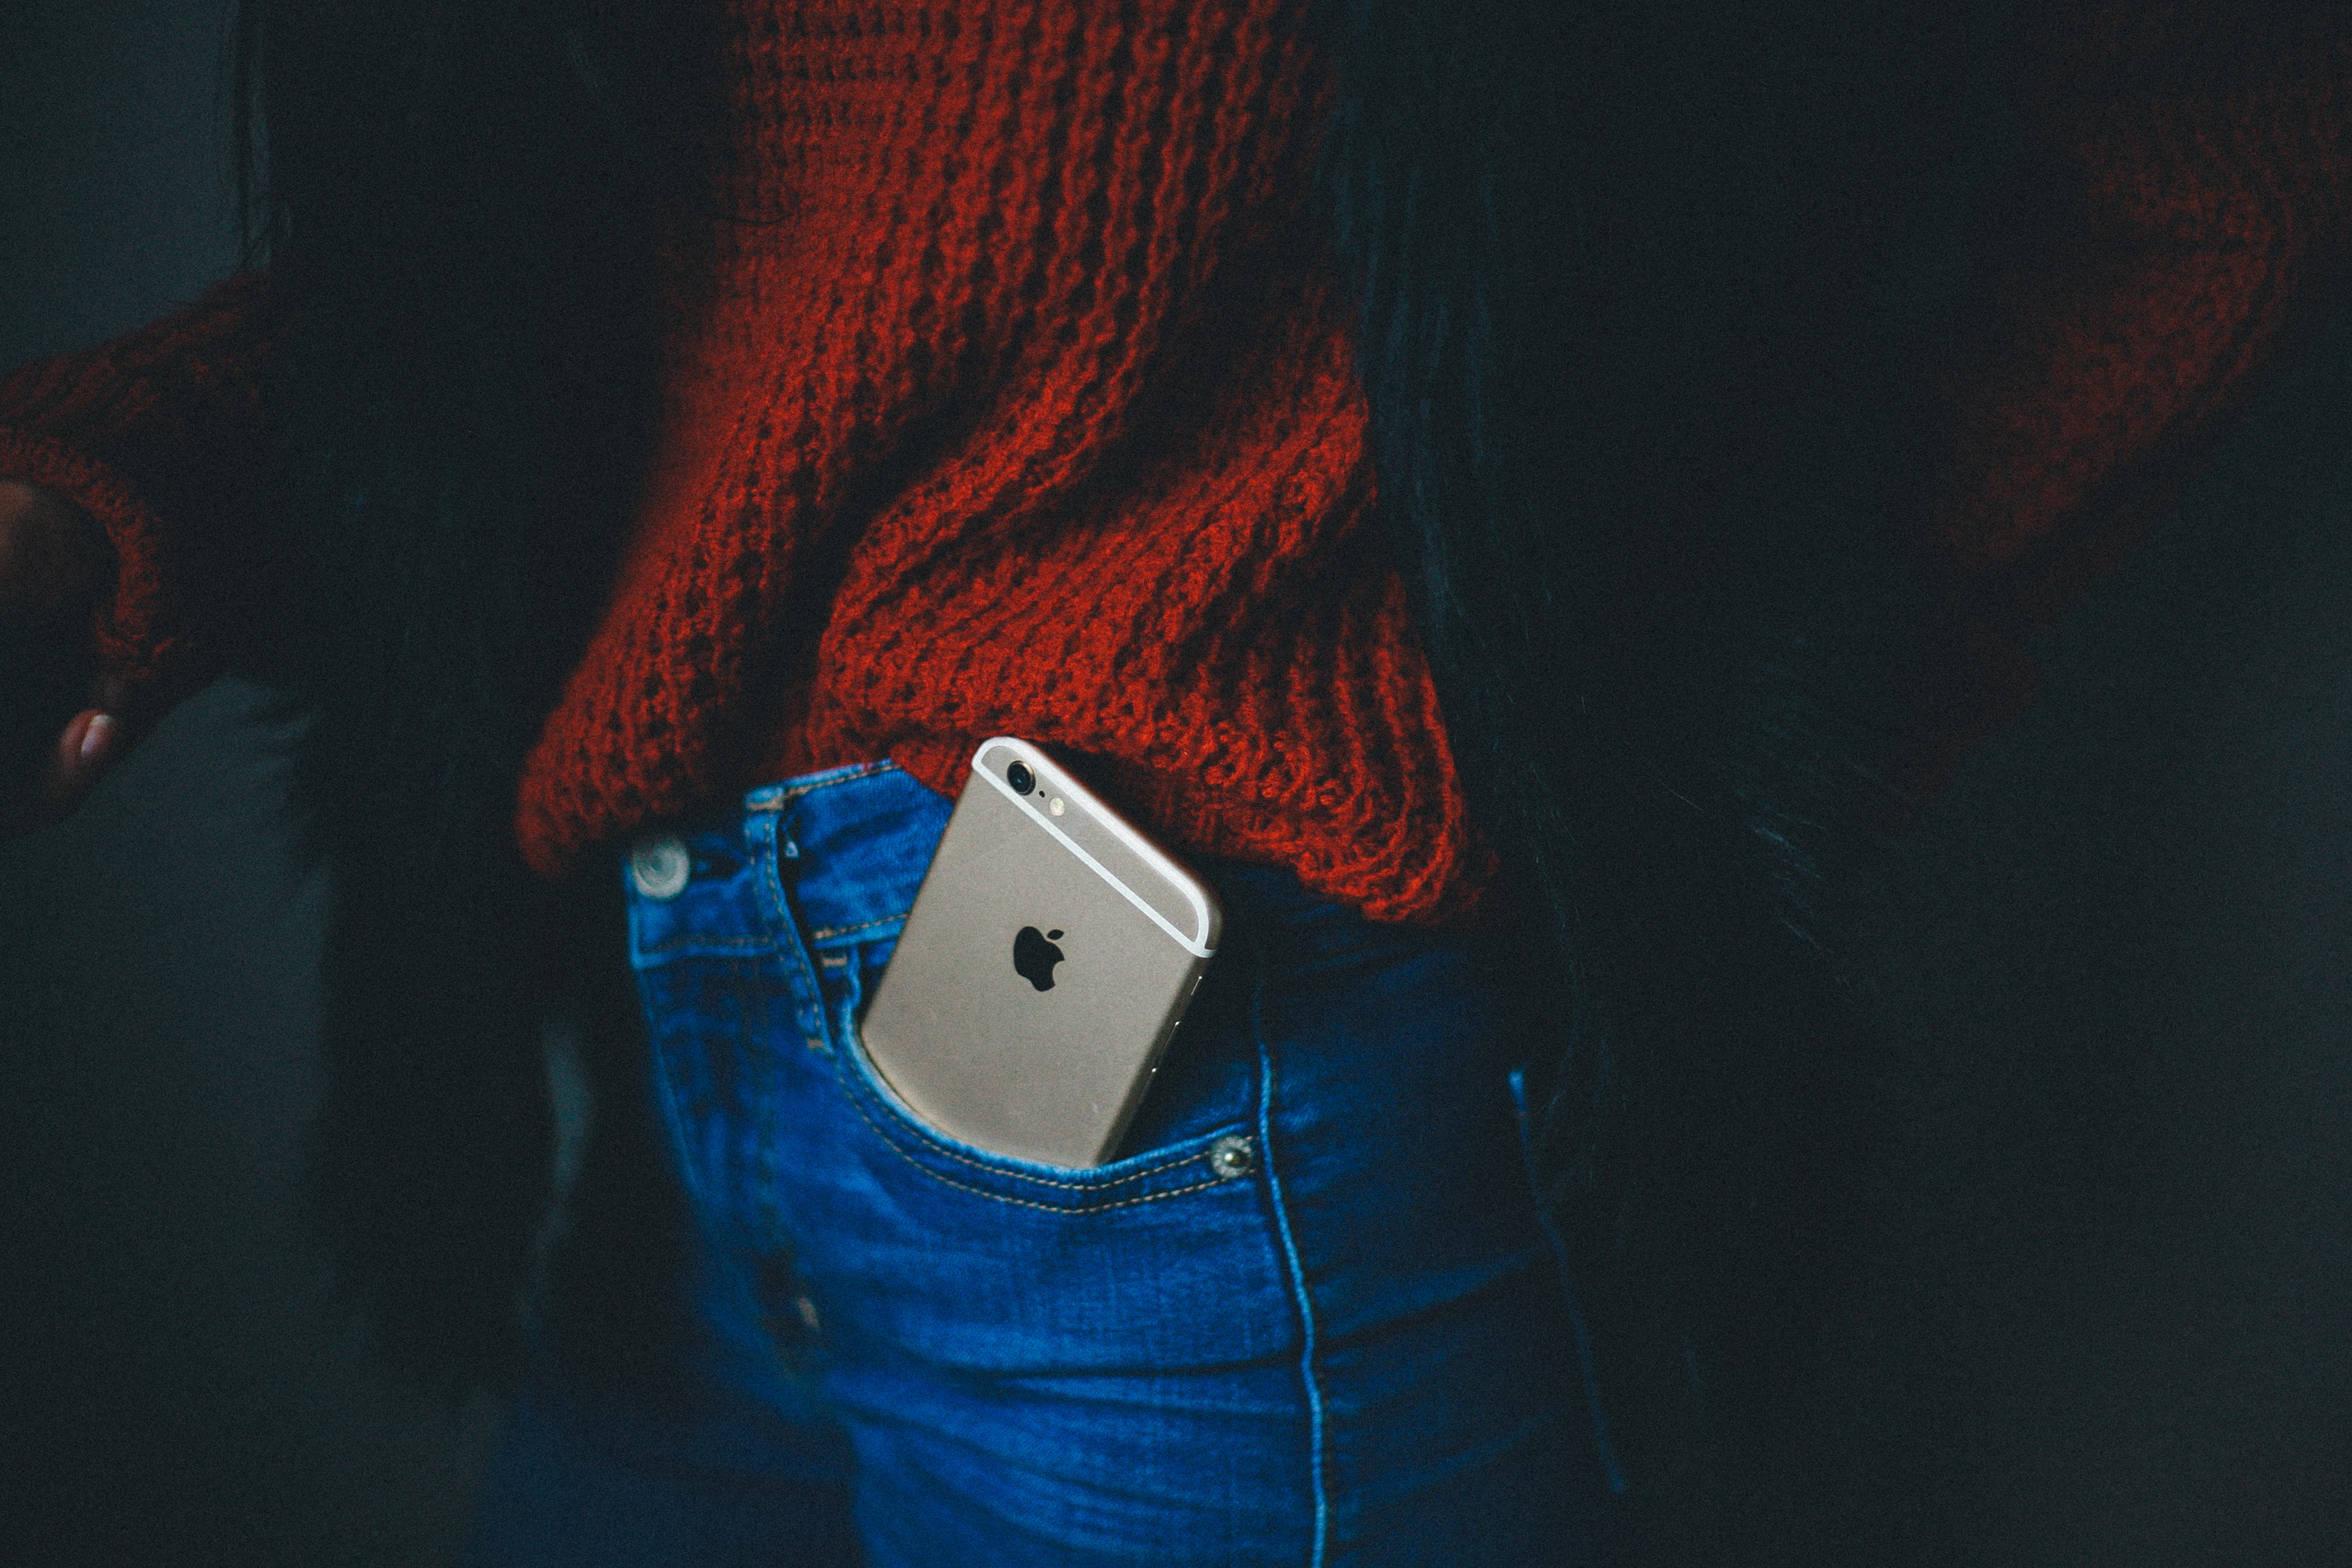 iphone in pocket